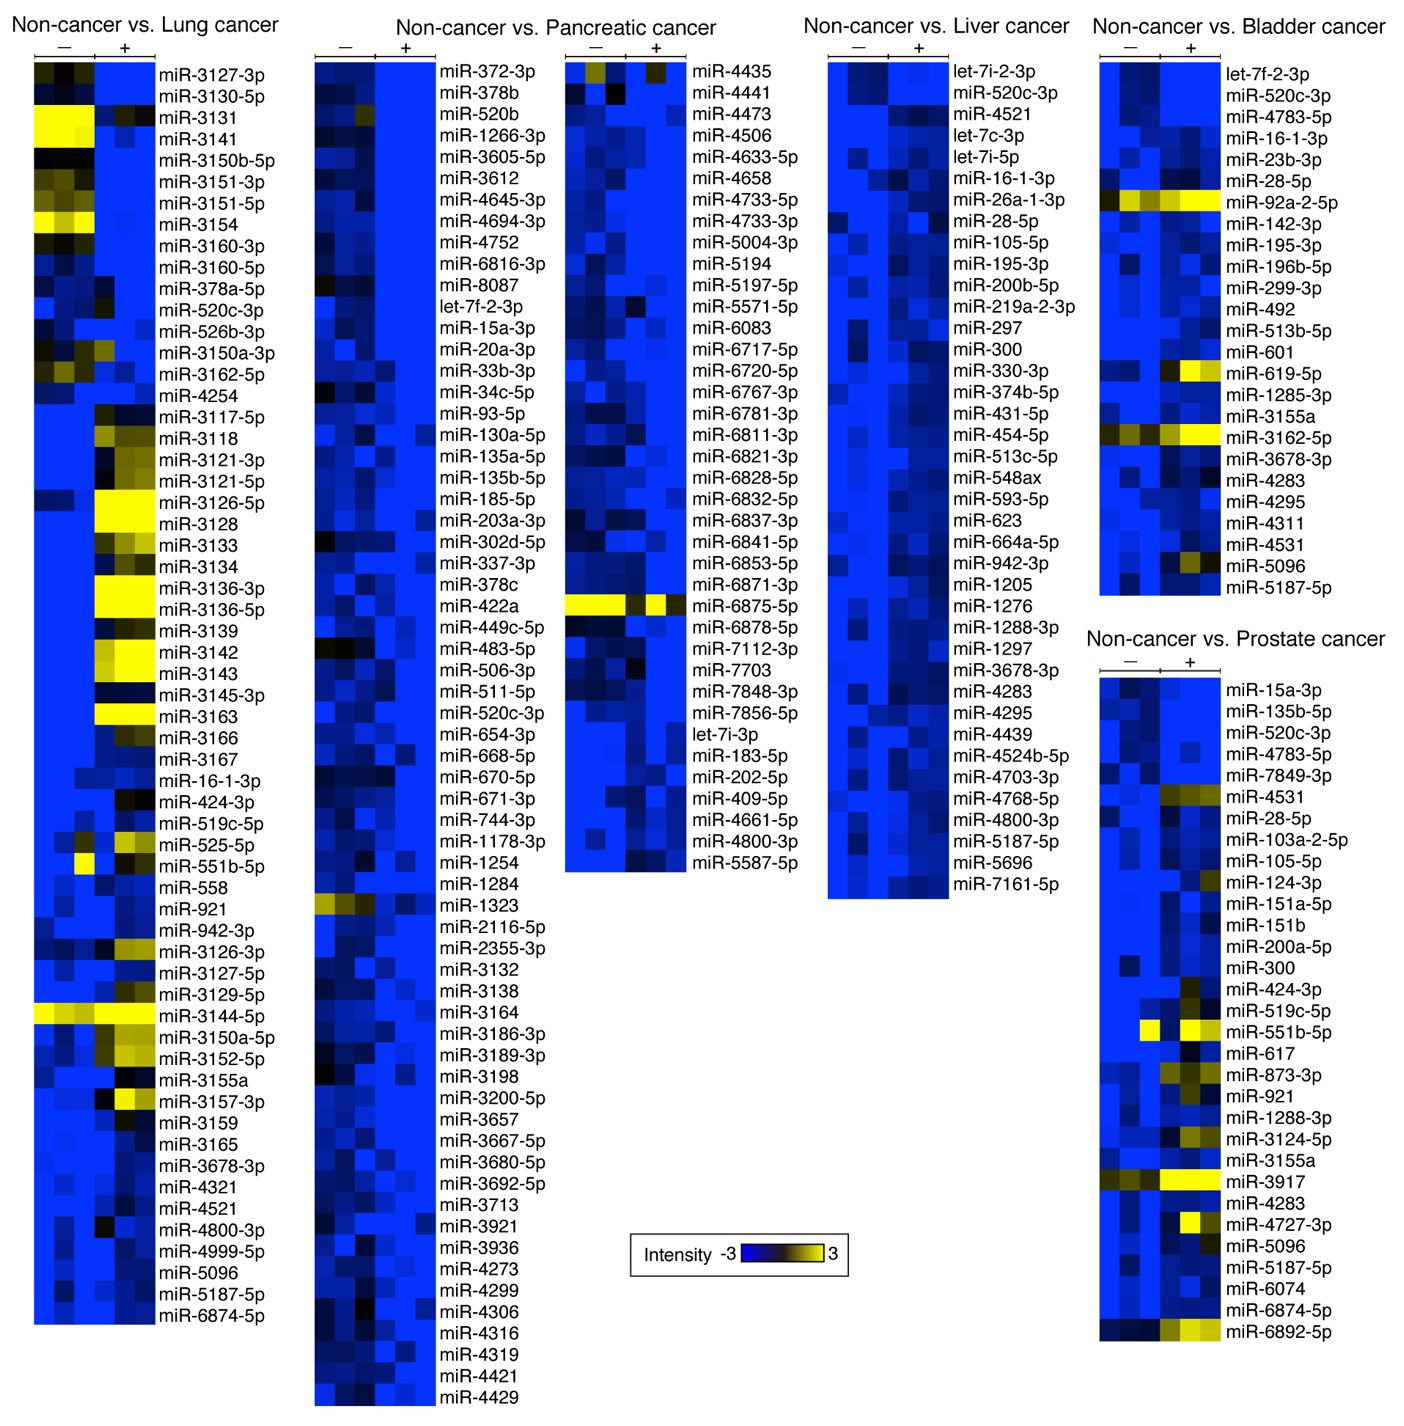 Identification of distinct microRNA patterns in healthy donors and cancer patients